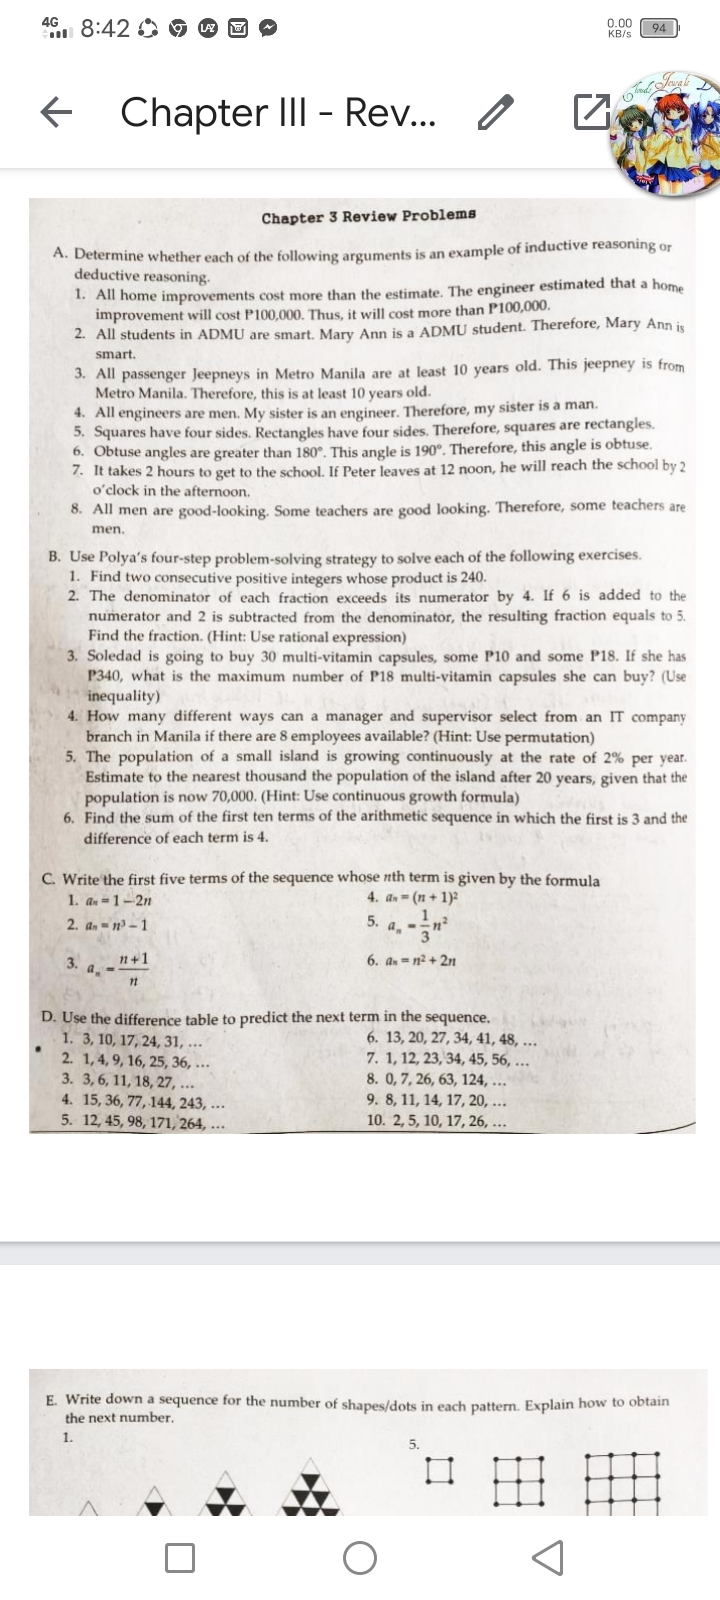 4G
u 8:42 O
0.00
KB/s
94
Chapter III - Rev..
Chapter 3 Review Problems
A. Determine whether each of the following arguments is an example of inductive reasoning or
deductive reasoning.
1. All home improvements cost more than the estimate. The engineer estimated that a home
improvement will cost P100,000. Thus, it will cost more than P100,000.
2. All students in ADMU are smart. Mary Ann is a ADMU student. Therefore, Mary Ann is
smart.
3. All passenger Jeepneys in Metro Manila are at least 10 years old. This jeepney is from
Metro Manila. Therefore, this is at least 10 years old.
4. All engineers are men. My sister is an engineer. Therefore, my sister is a man.
5. Squares have four sides. Rectangles have four sides. Therefore, squares are rectangles.
6. Obtuse angles are greater than 180°. This angle is 190°. Therefore, this angle is obtuse.
7. It takes 2 hours to get to the school. If Peter leaves at 12 noon, he will reach the school by 2
o'clock in the afternoon.
8. All men are good-looking. Some teachers are good looking. Therefore, some teachers are
men.
B. Use Polya's four-step problem-solving strategy to solve each of the following exercises.
1. Find two consecutive positive integers whose product is 240.
2. The denominator of each fraction exceeds its numerator by 4. If 6 is added to the
numerator and 2 is subtracted from the denominator, the resulting fraction equals to 5.
Find the fraction. (Hint: Use rational expression)
3. Soledad is going to buy 30 multi-vitamin capsules, some P10 and some P18. If she has
P340, what is the maximum number of P18 multi-vitamin capsules she can buy? (Use
inequality)
4. How many different ways can a manager and supervisor select from an IT company
branch in Manila if there are 8 employees available? (Hint: Use permutation)
5. The population of a small island is growing continuously at the rate of 2% per year.
Estimate to the nearest thousand the population of the island after 20 years, given that the
population is now 70,000. (Hint: Use continuous growth formula)
6. Find the sum of the first ten terms of the arithmetic sequence in which the first is 3 and the
difference of each term is 4.
C. Write the first five terms of the sequence whose nth term is given by the formula
1. an = 1 –2n
4. an - (n + 1)²
1
a, -
2. an = n³ – 1
5.
n+1
3. a.-
6. an = n² + 2n
11
D. Use the difference table to predict the next term in the sequence.
1. 3, 10, 17, 24, 31, ...
2. 1,4, 9, 16, 25, 36, ...
3. 3,6, 11, 18, 27, ...
4. 15, 36, 77, 144, 243,
5. 12, 45, 98, 171, 264, ...
6. 13, 20, 27, 34, 41, 48, ...
7. 1, 12, 23, 34, 45, 56, ...
8. 0,7, 26, 63, 124, ...
9. 8, 11, 14, 17, 20, ...
10. 2, 5, 10, 17, 26, ...
E. Write down a sequence for the number of shapes/dots in each pattern. Explain how to obtain
the next number,
1.
